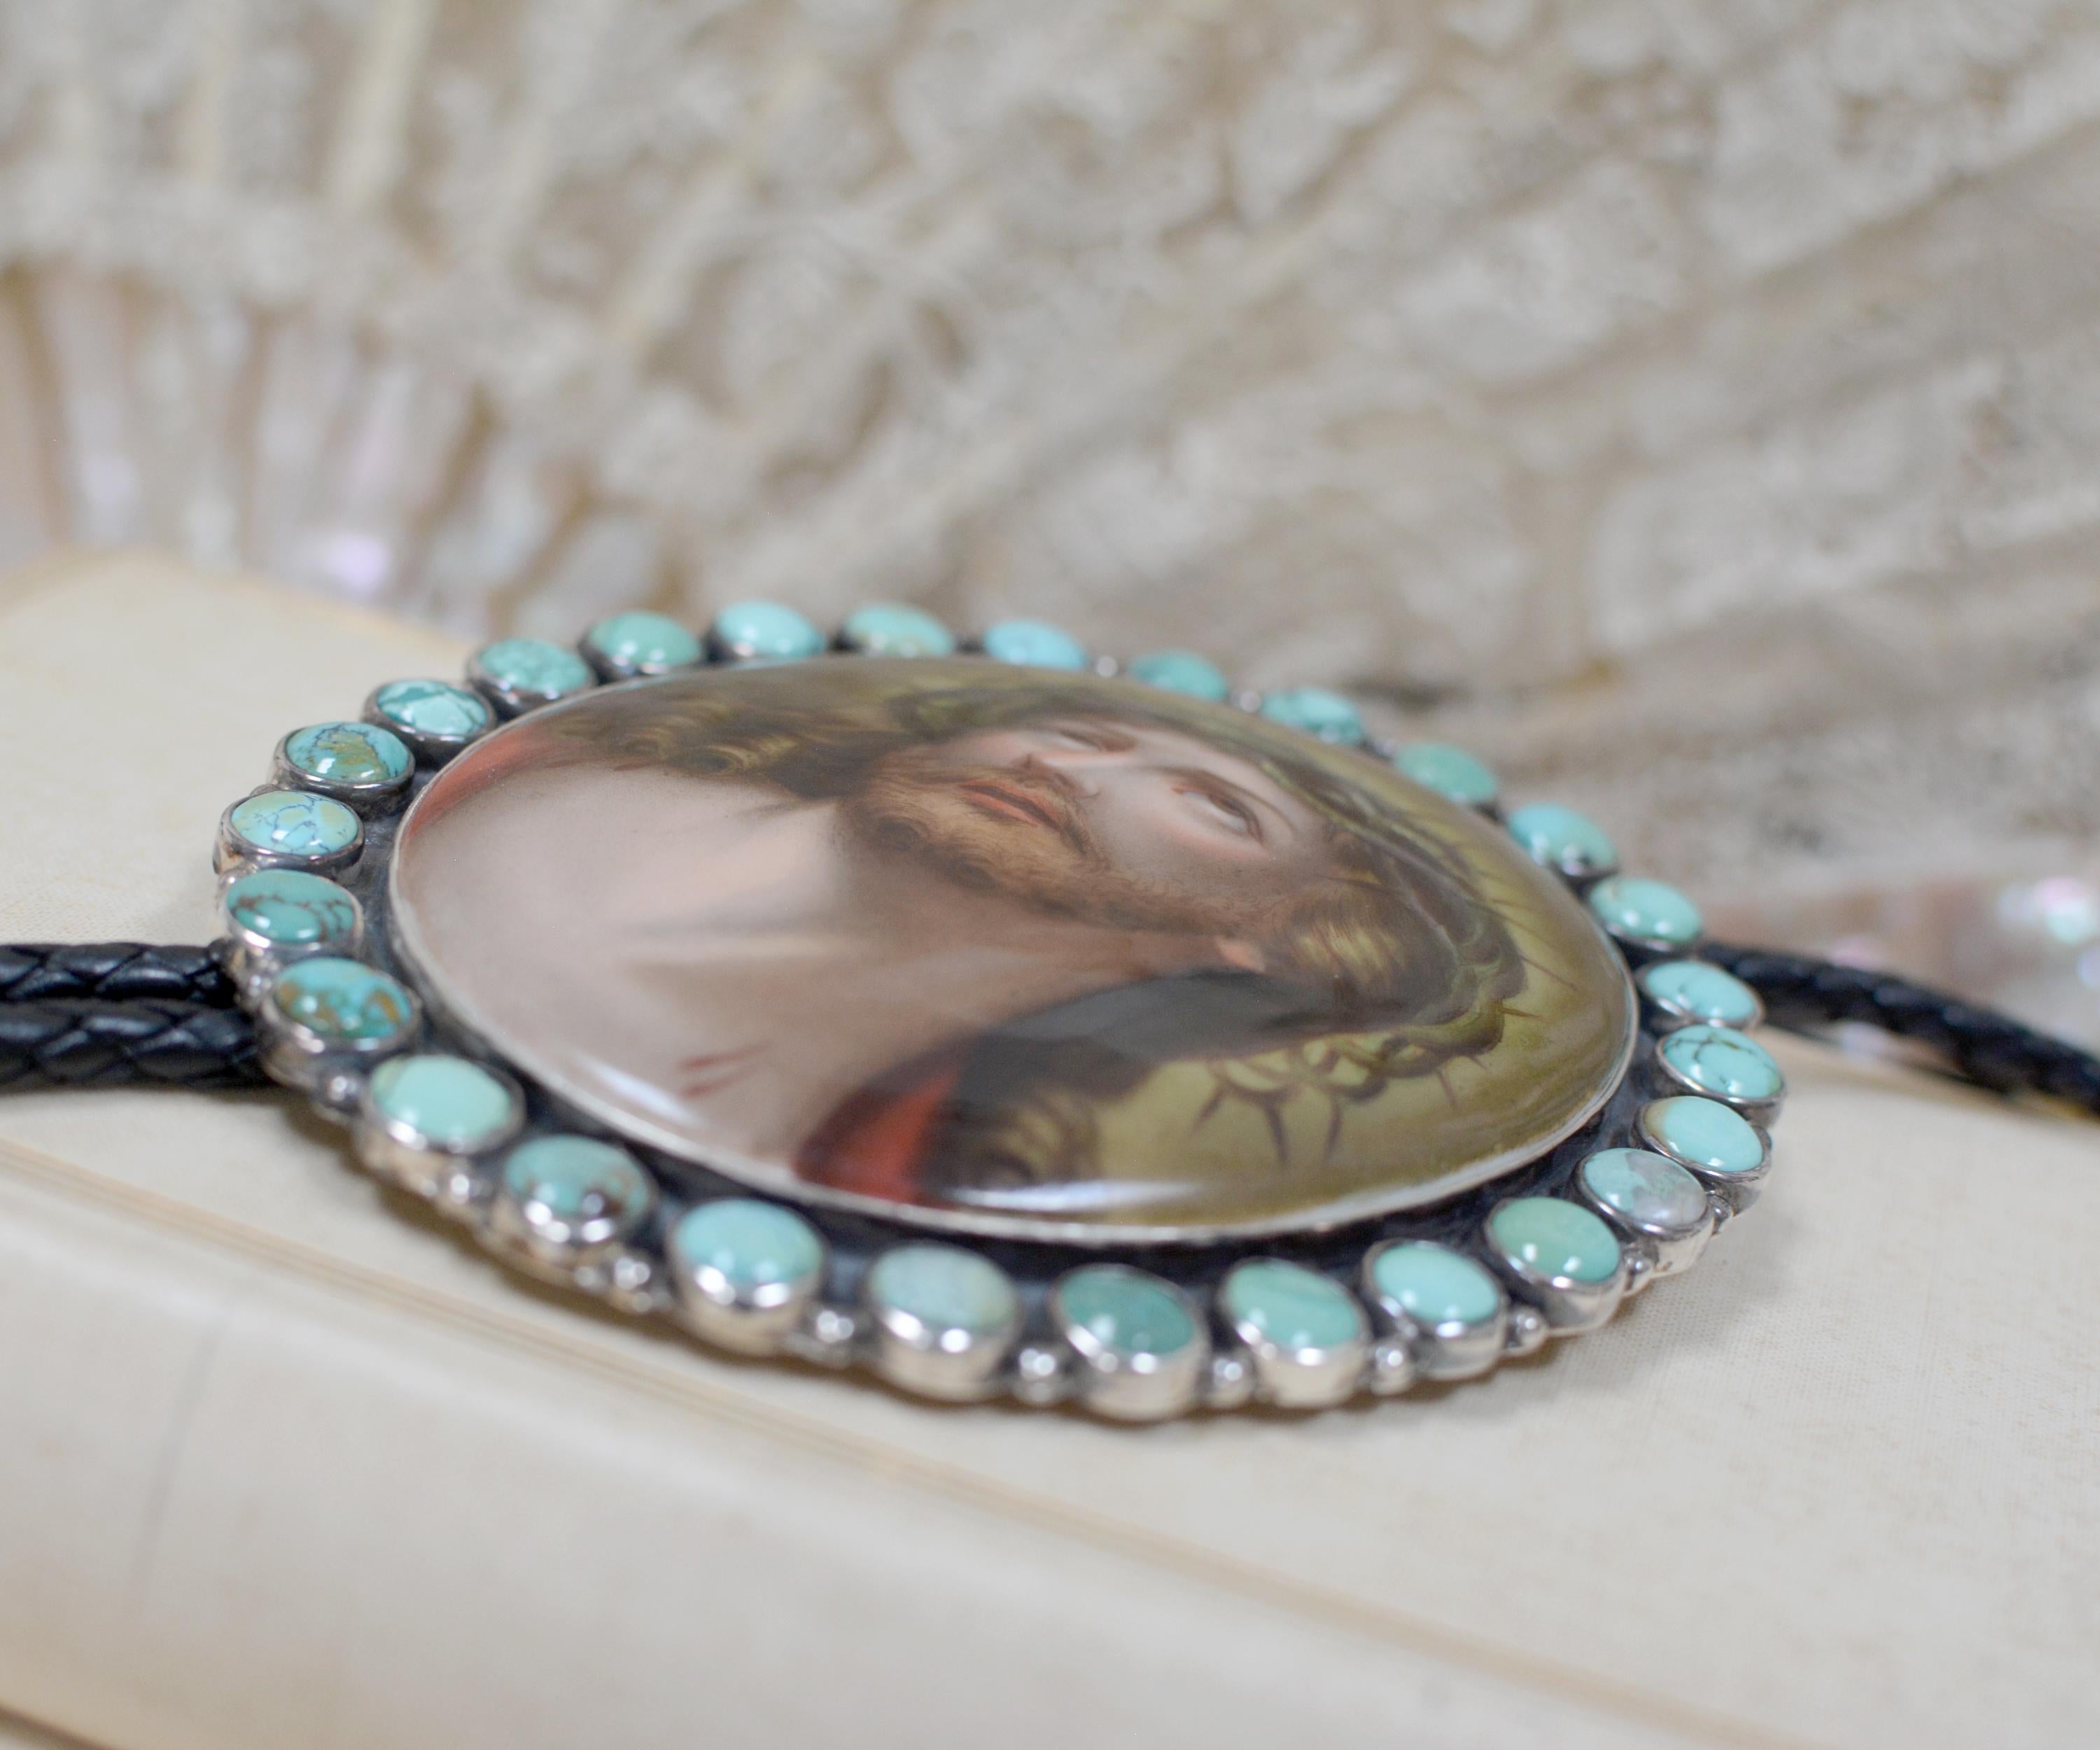 Jill Garber Nineteenth Century Porcelain Portrait of Christ Bolo with Turquoise For Sale 2